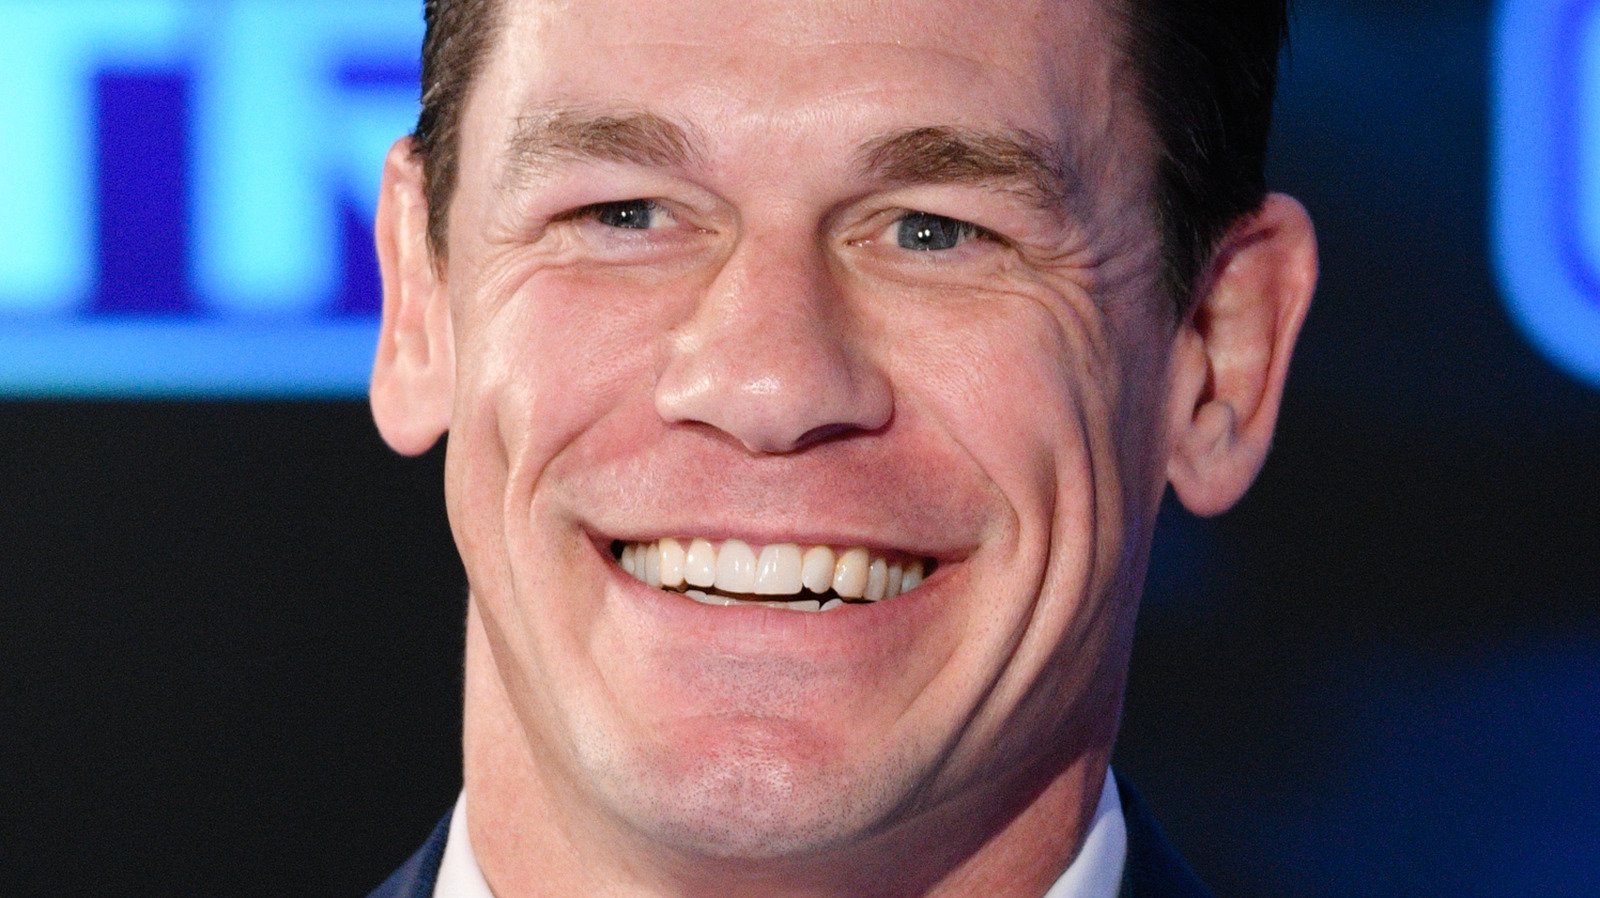 Facts You Probably Never Knew About John Cena - Wrestling Inc.